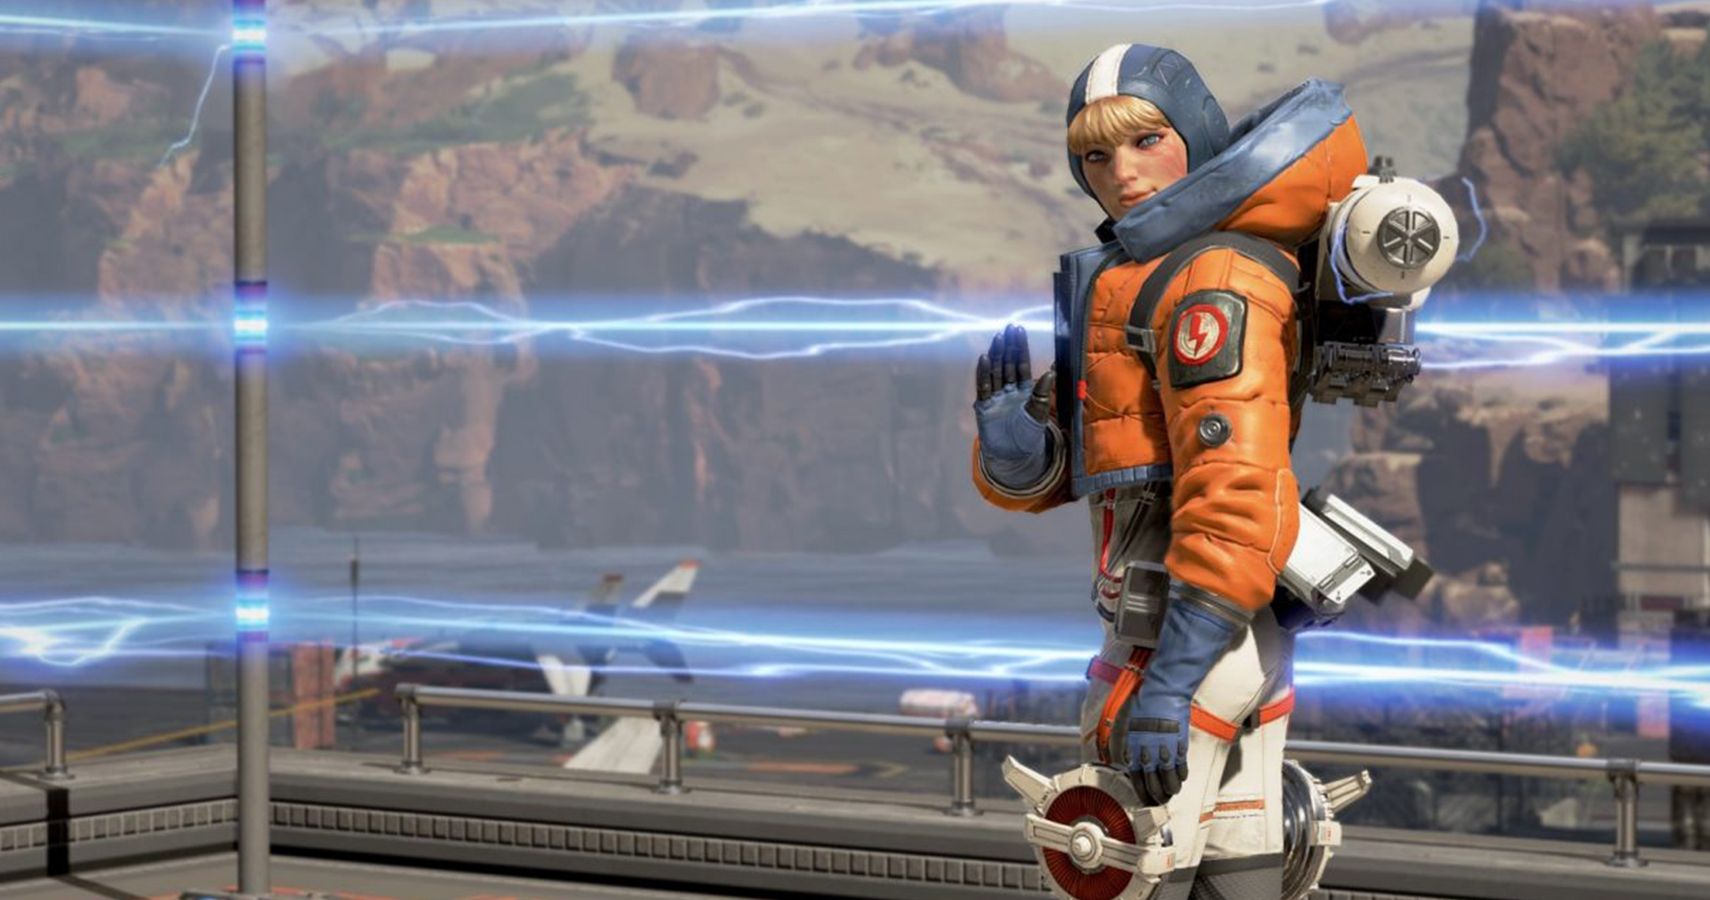 EA Sealed Anthems Fate By Releasing Apex Legends The Same Month